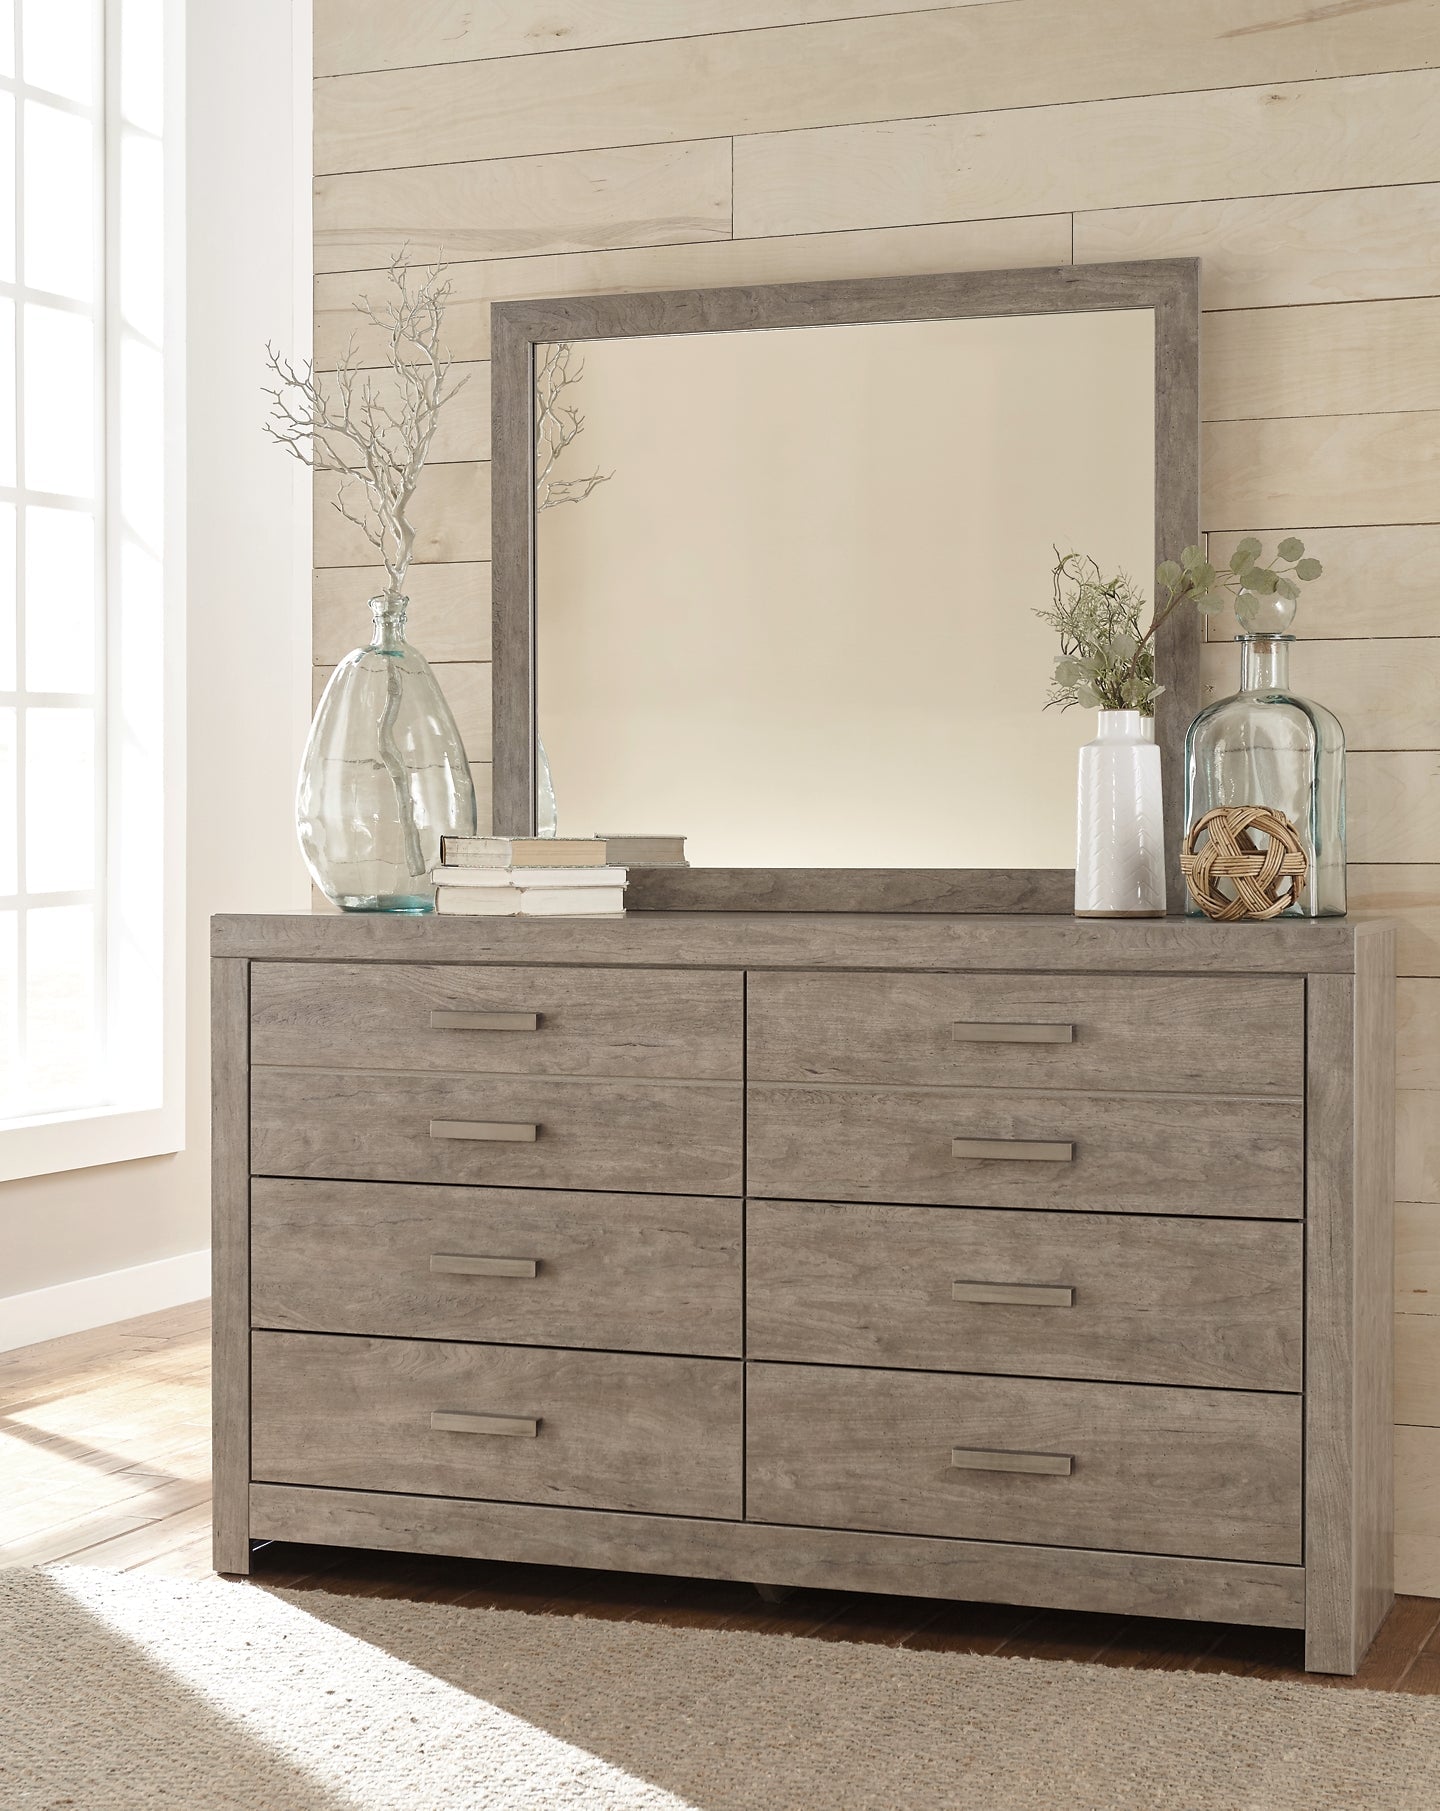 Culverbach Dresser and Mirror at Walker Mattress and Furniture Locations in Cedar Park and Belton TX.